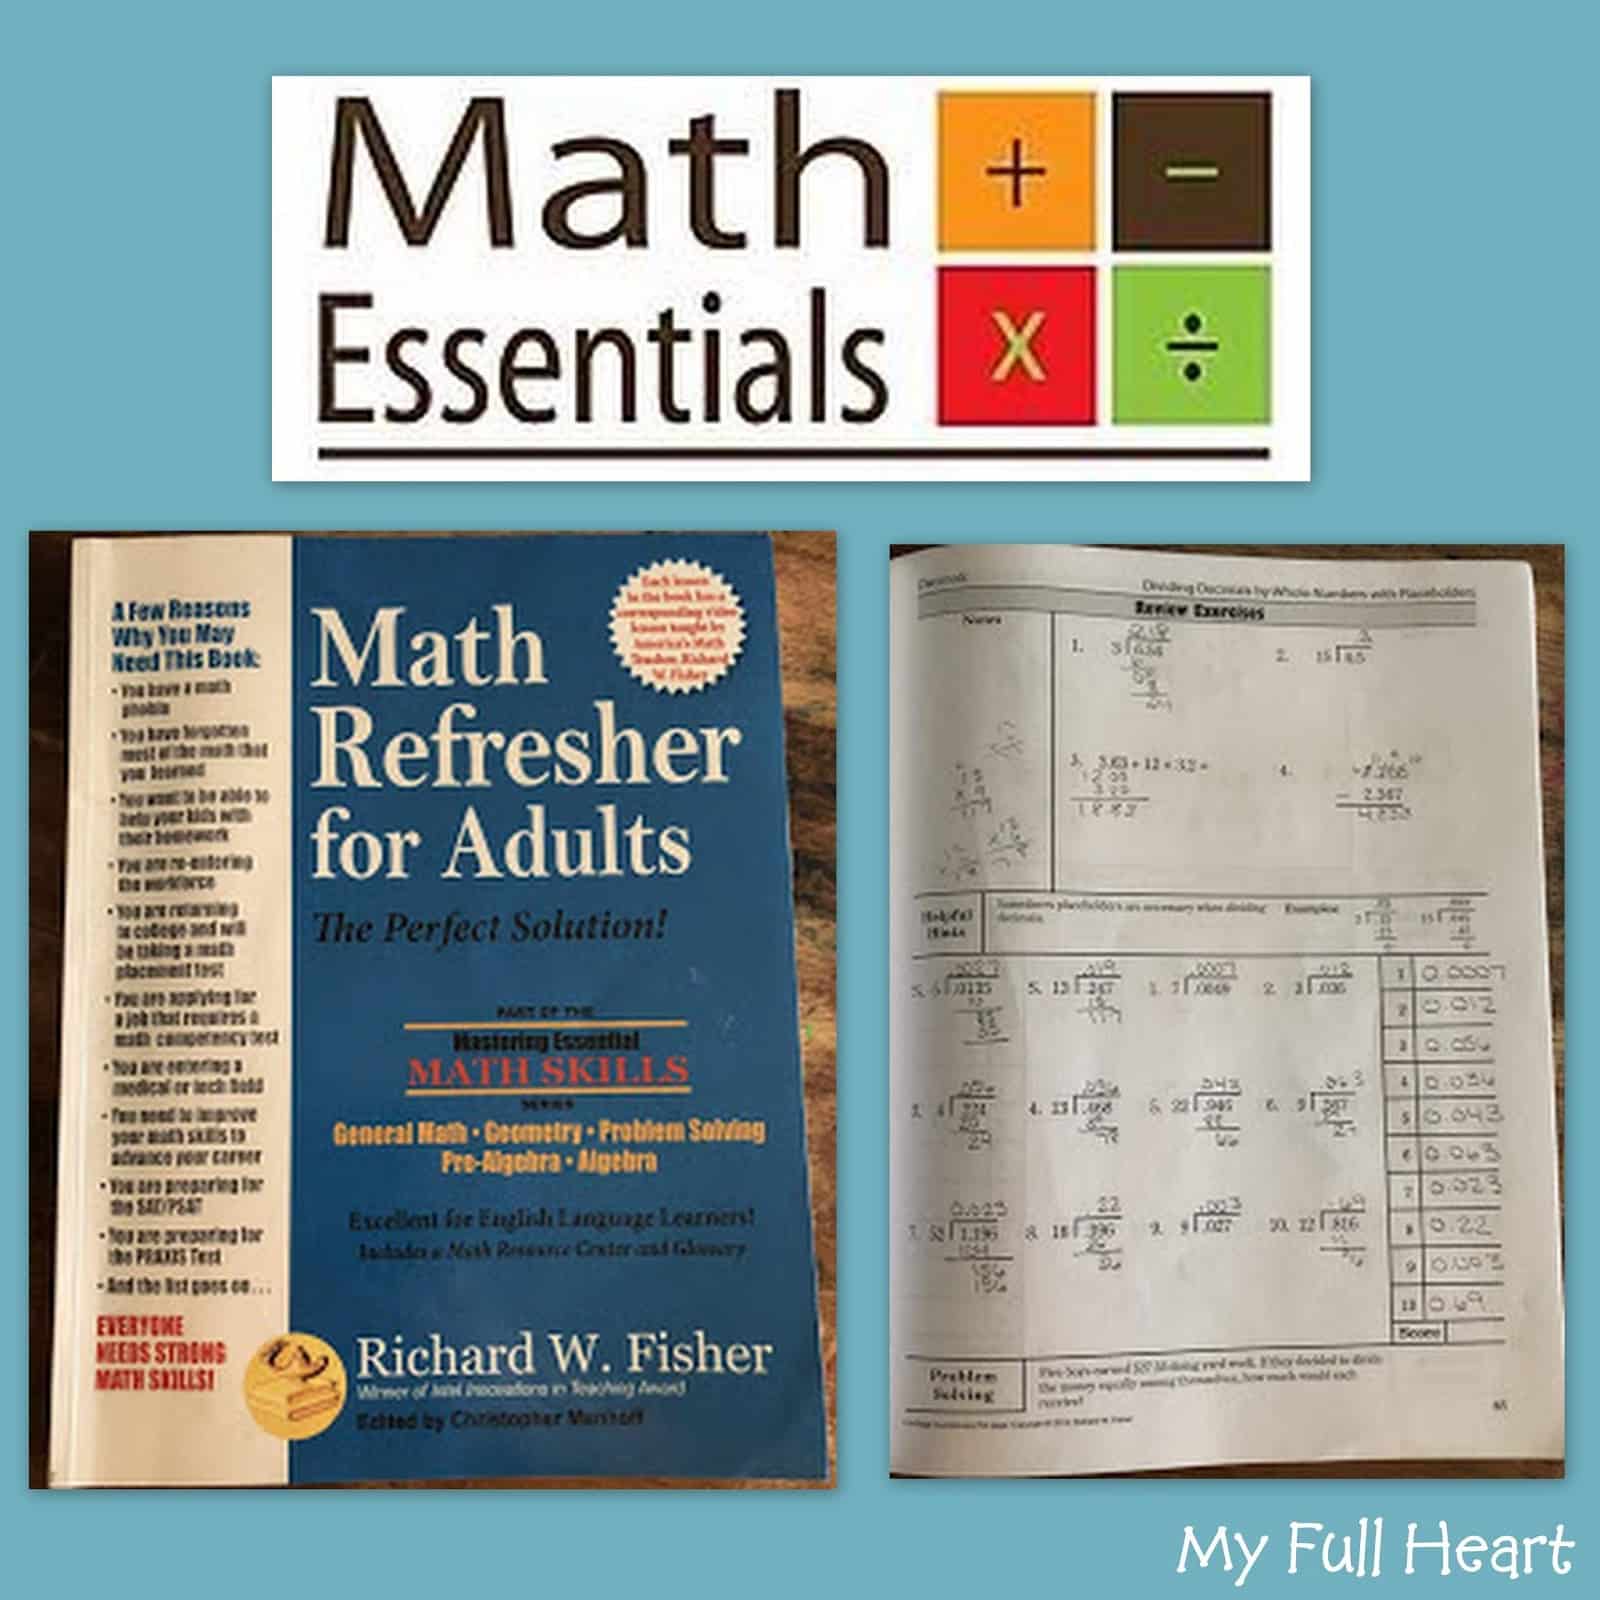 My Full Heart: Math Refresher for Adults